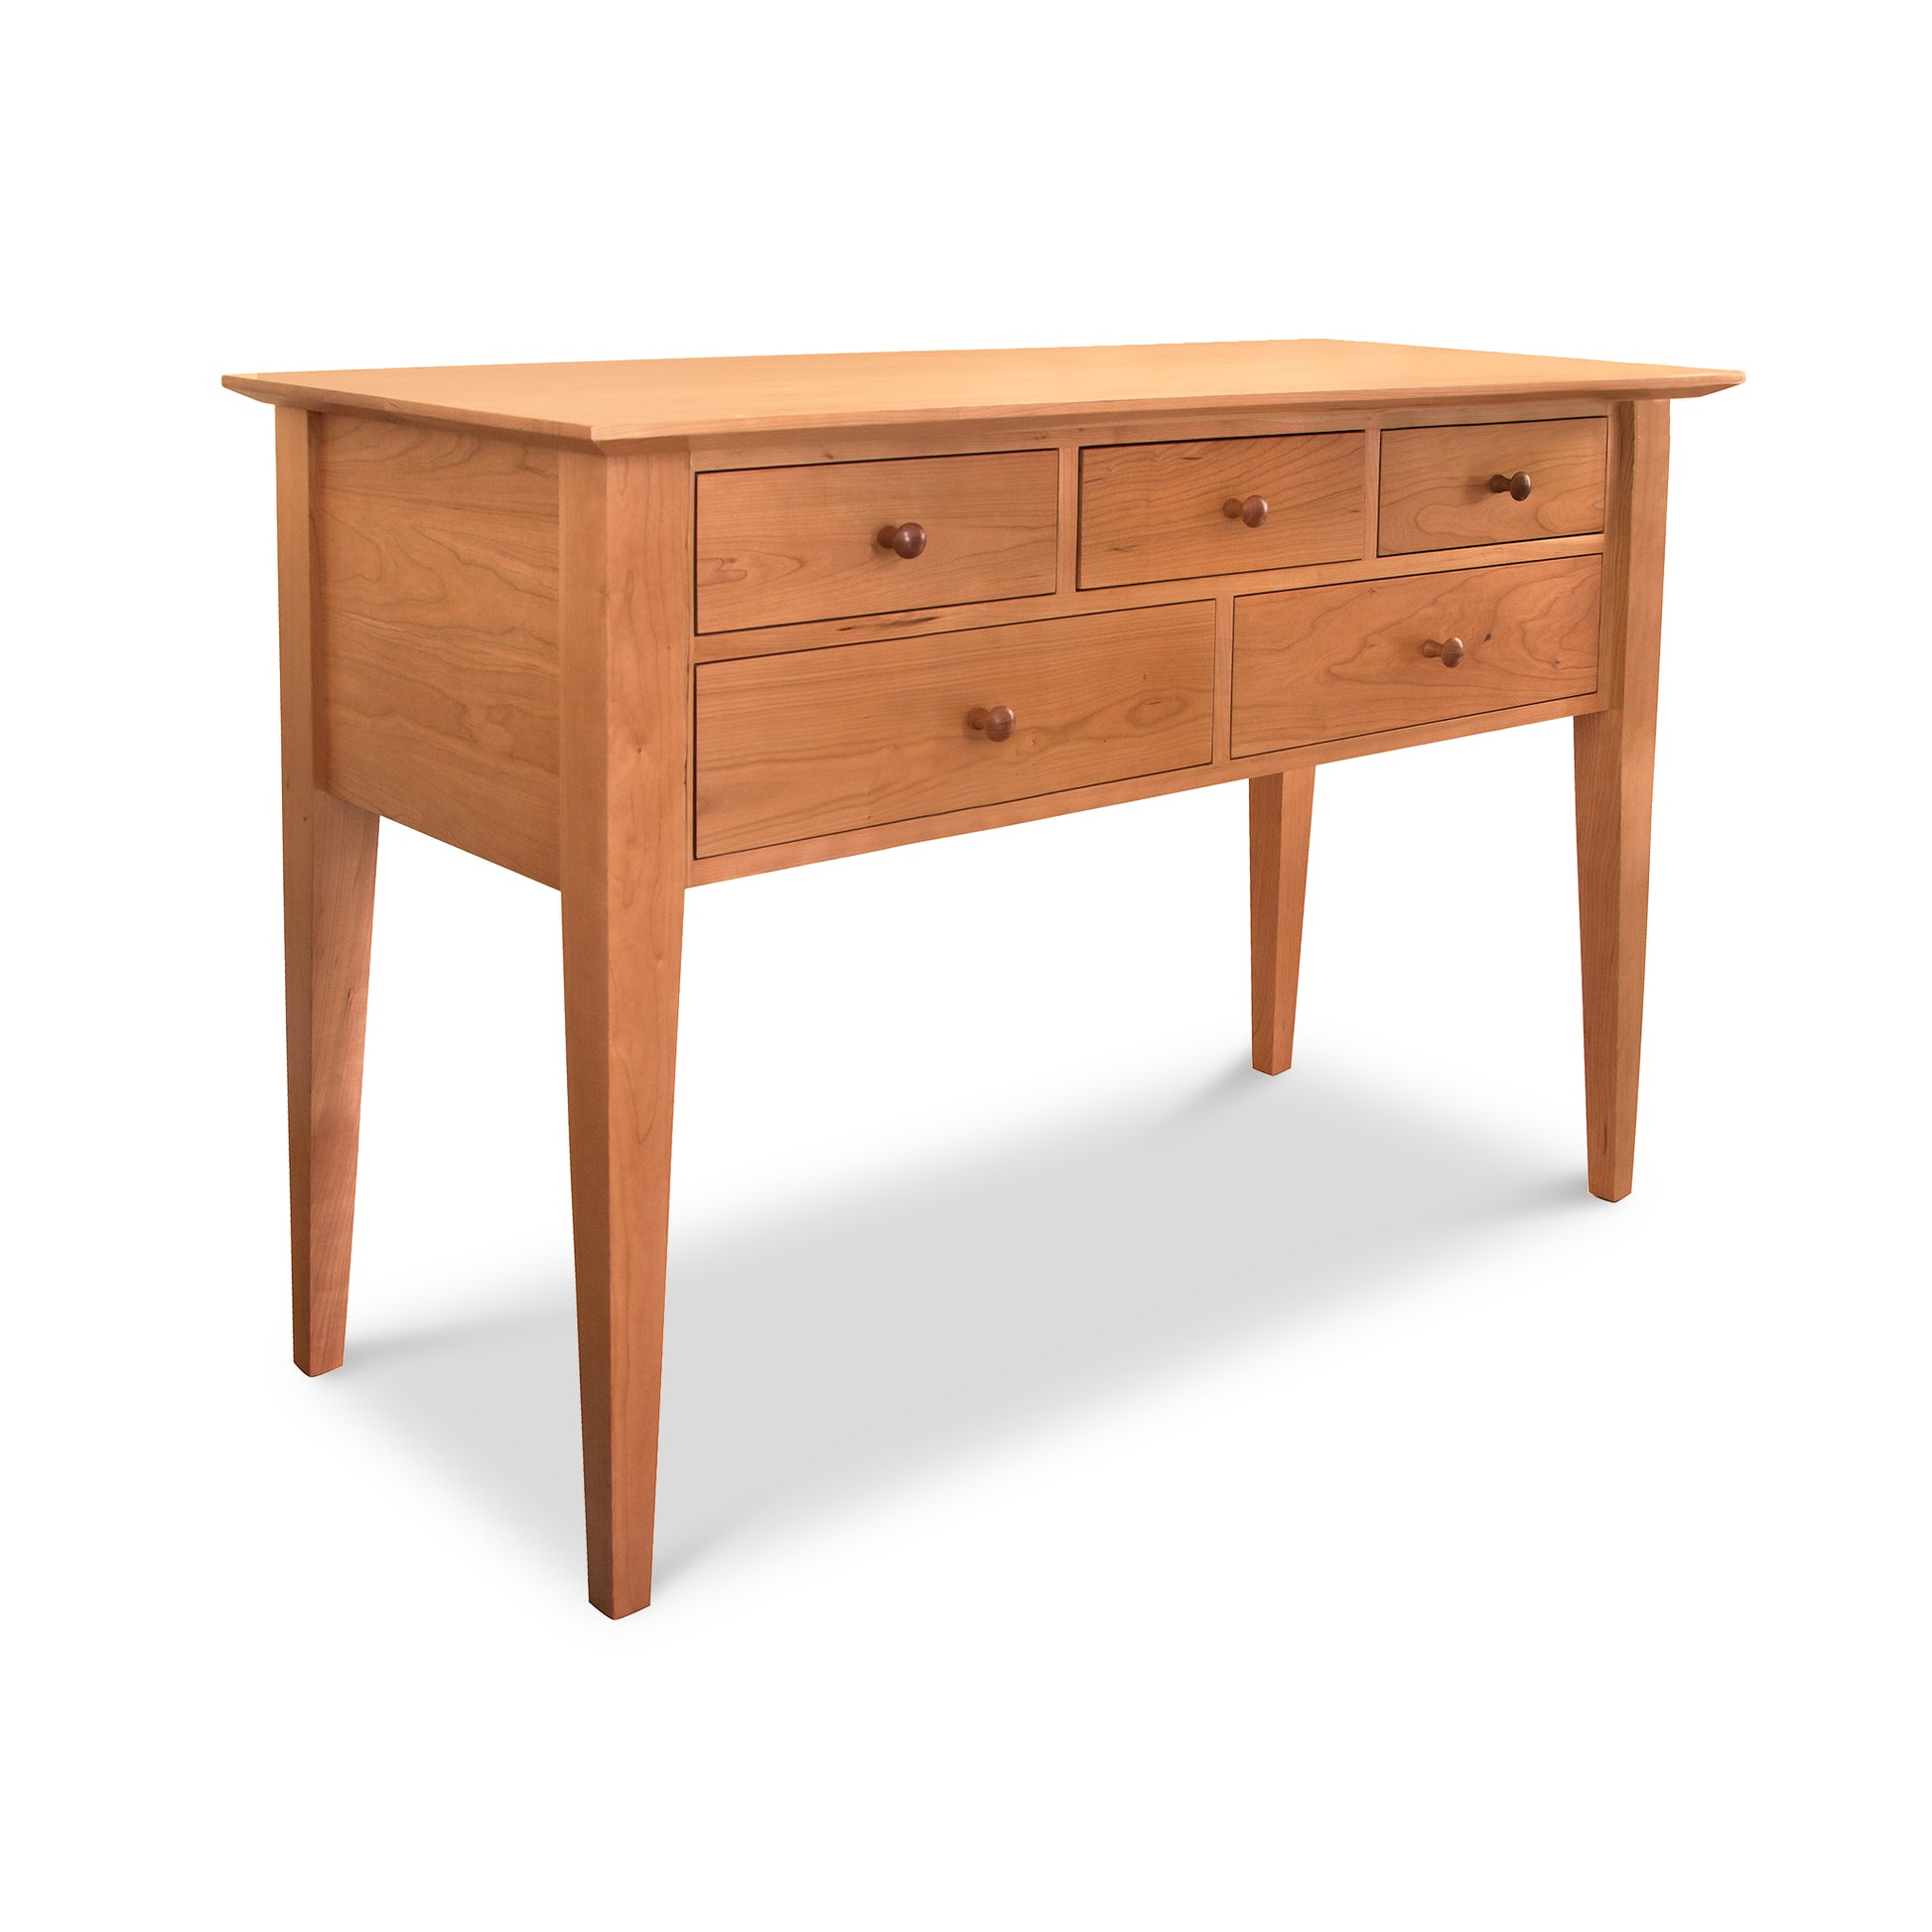 A Classic Shaker Hunt Board console table with tapered legs and eco-friendly drawers by Lyndon Furniture.